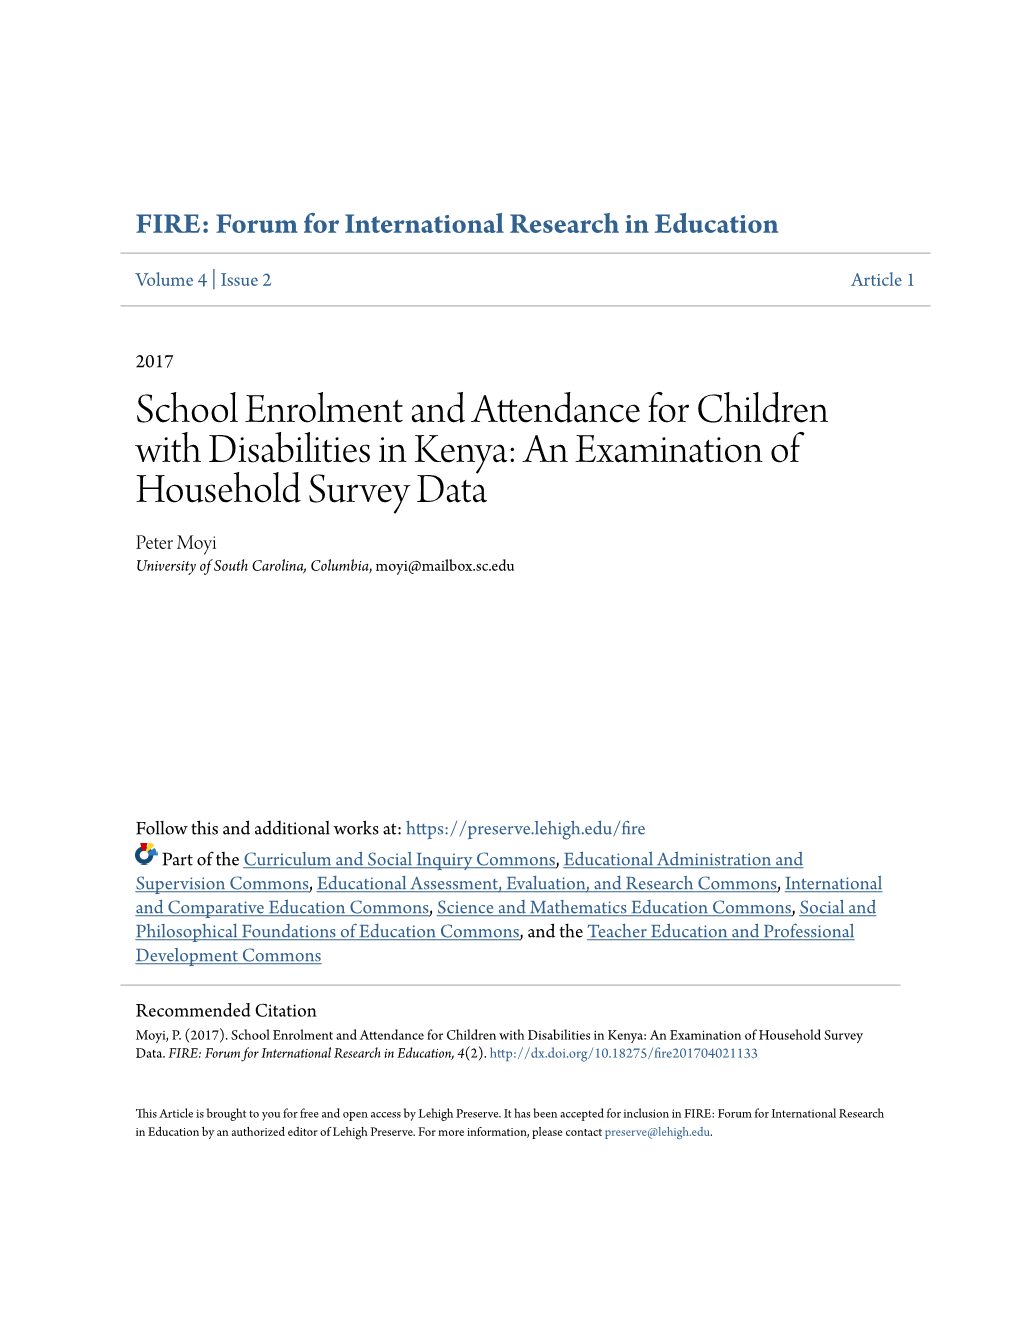 School Enrolment and Attendance for Children with Disabilities in Kenya